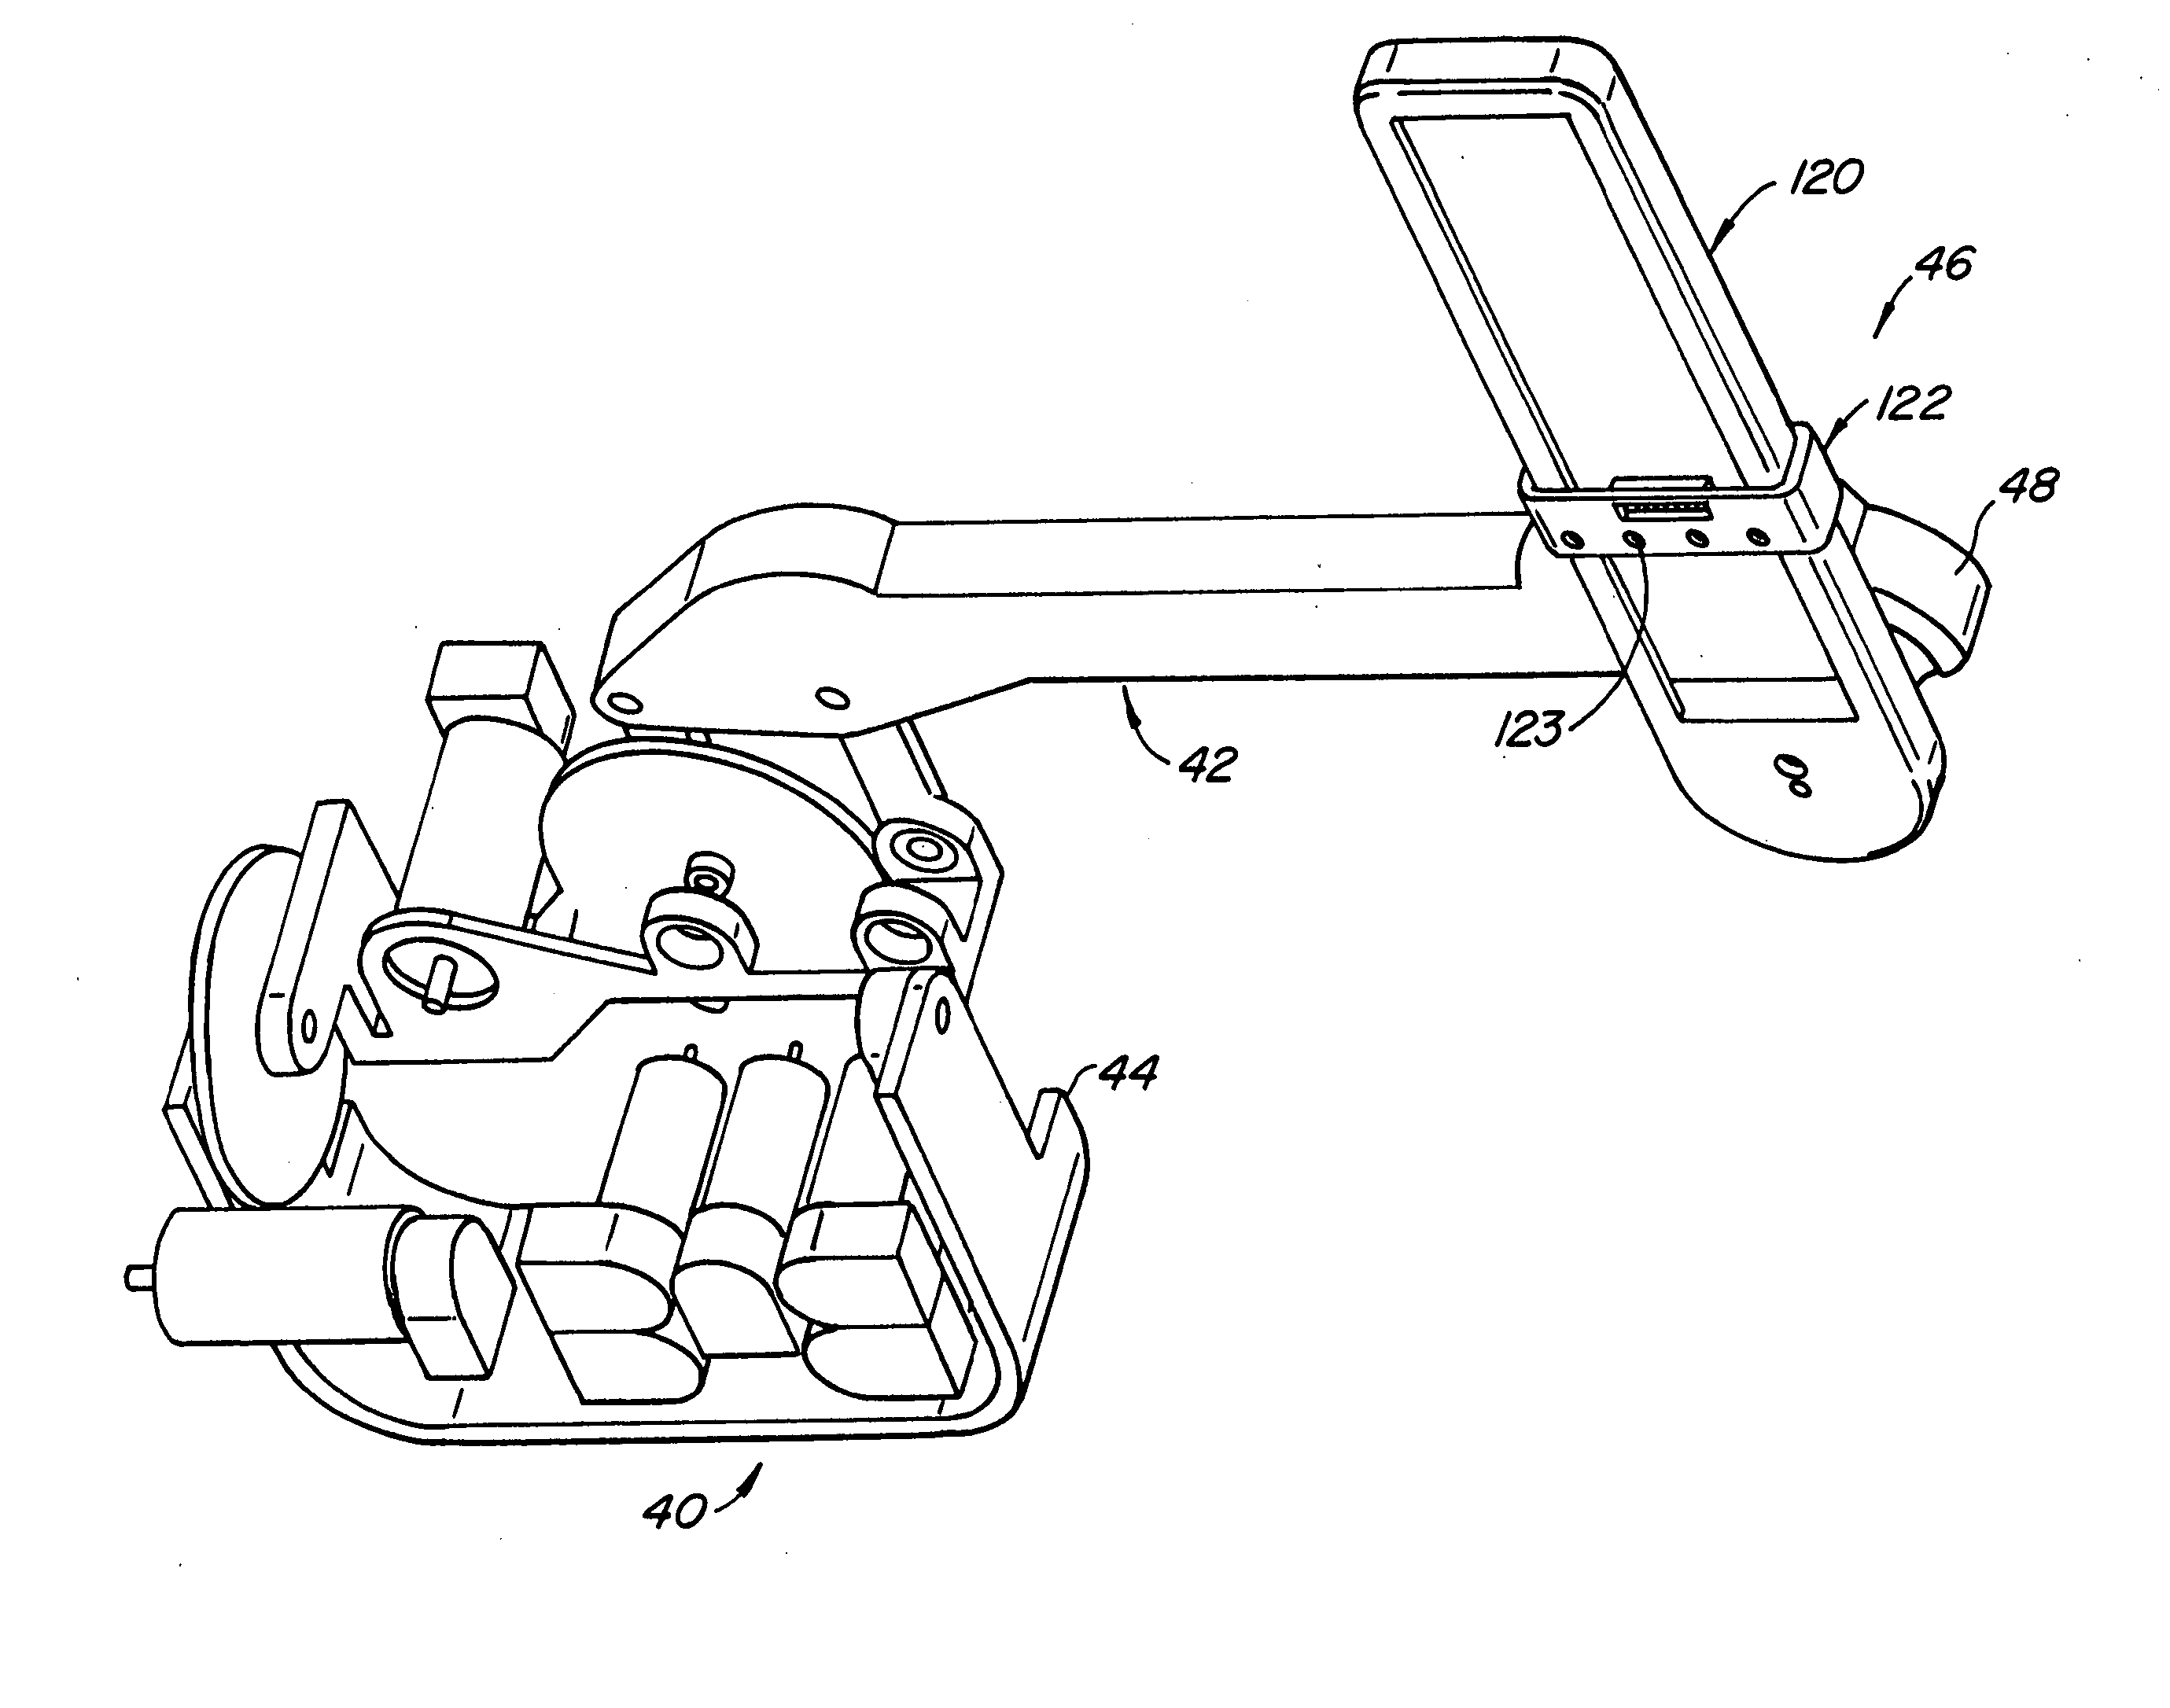 Multi-component telepresence system and method